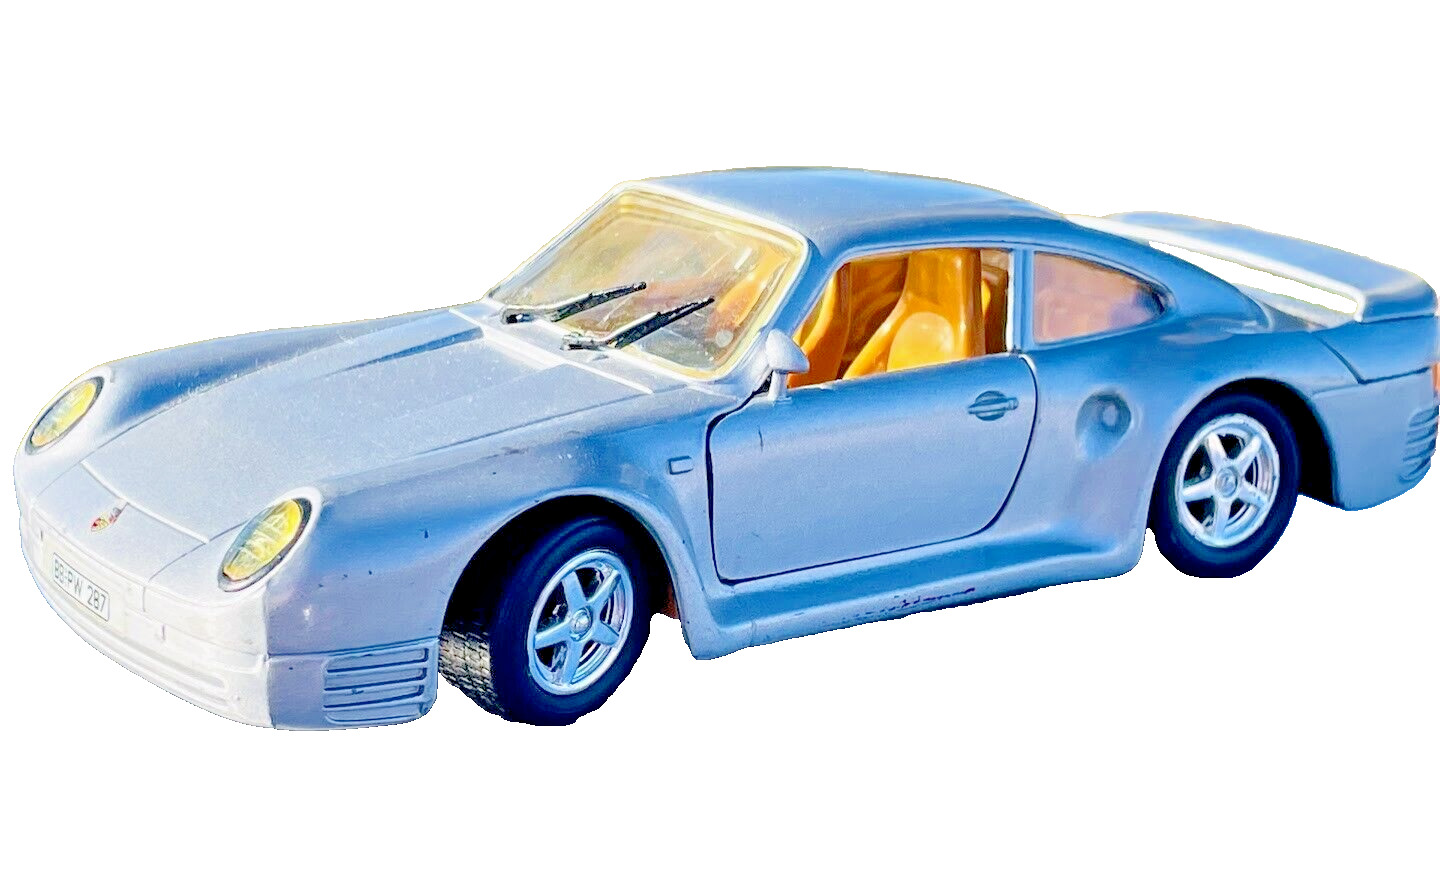 1988 Porsche 959 Silver Revell 1:24 Scale Diecast Metal Model Display Sports Car